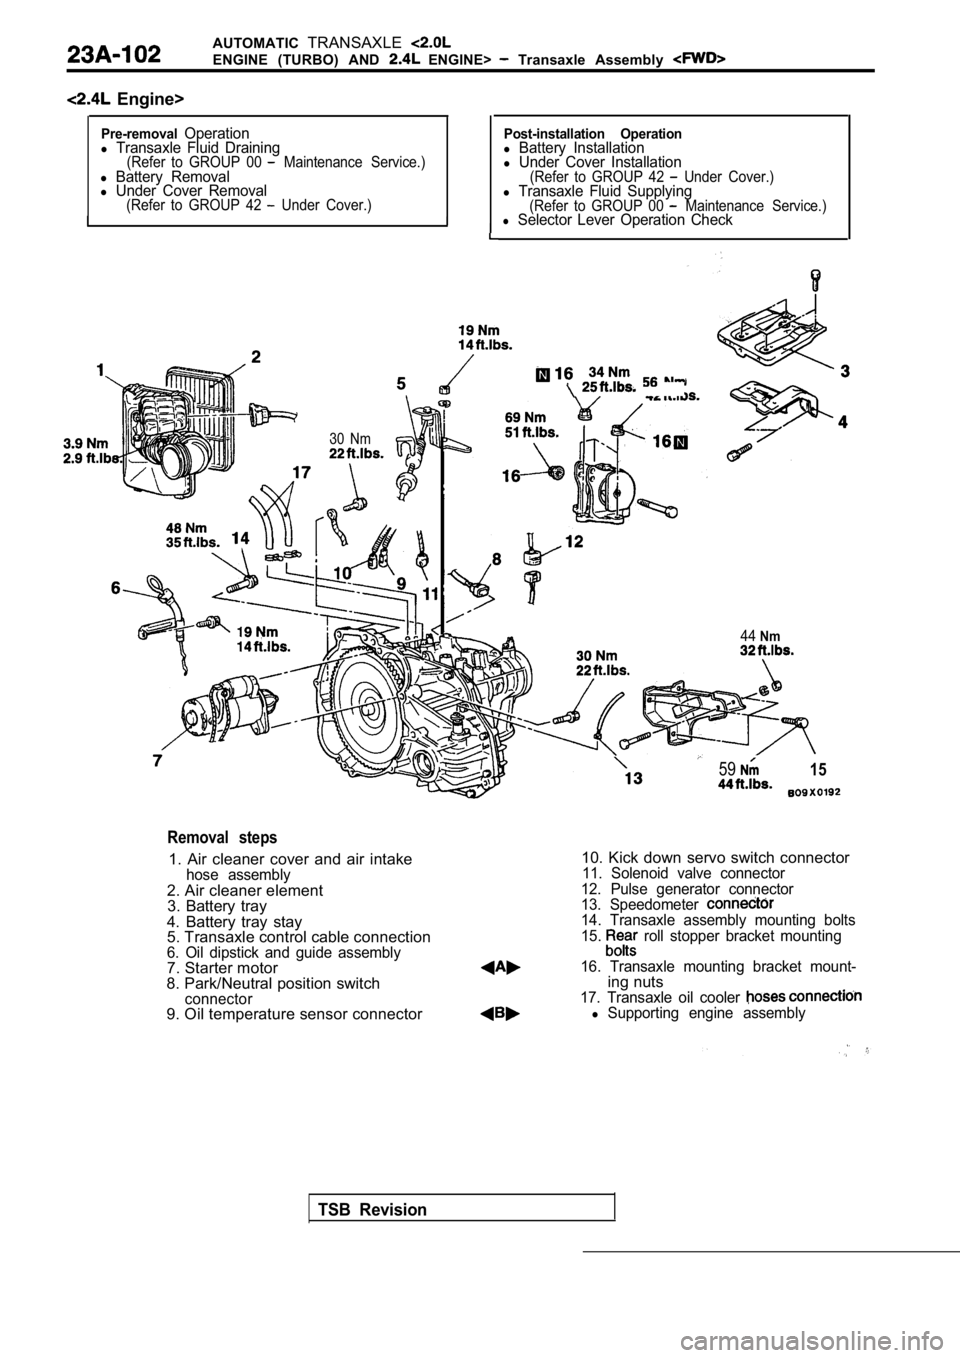 MITSUBISHI SPYDER 1990  Service Repair Manual AUTOMATICTRANSAXLE
ENGINE  (TURBO)  AND   ENGINE>   Transaxle  Assembly 
  Engine>
Pre-removalOperationl Transaxle  Fluid  Draining(Refer  to  GROUP  00   Maintenance  Service.)l Battery  Removall Und